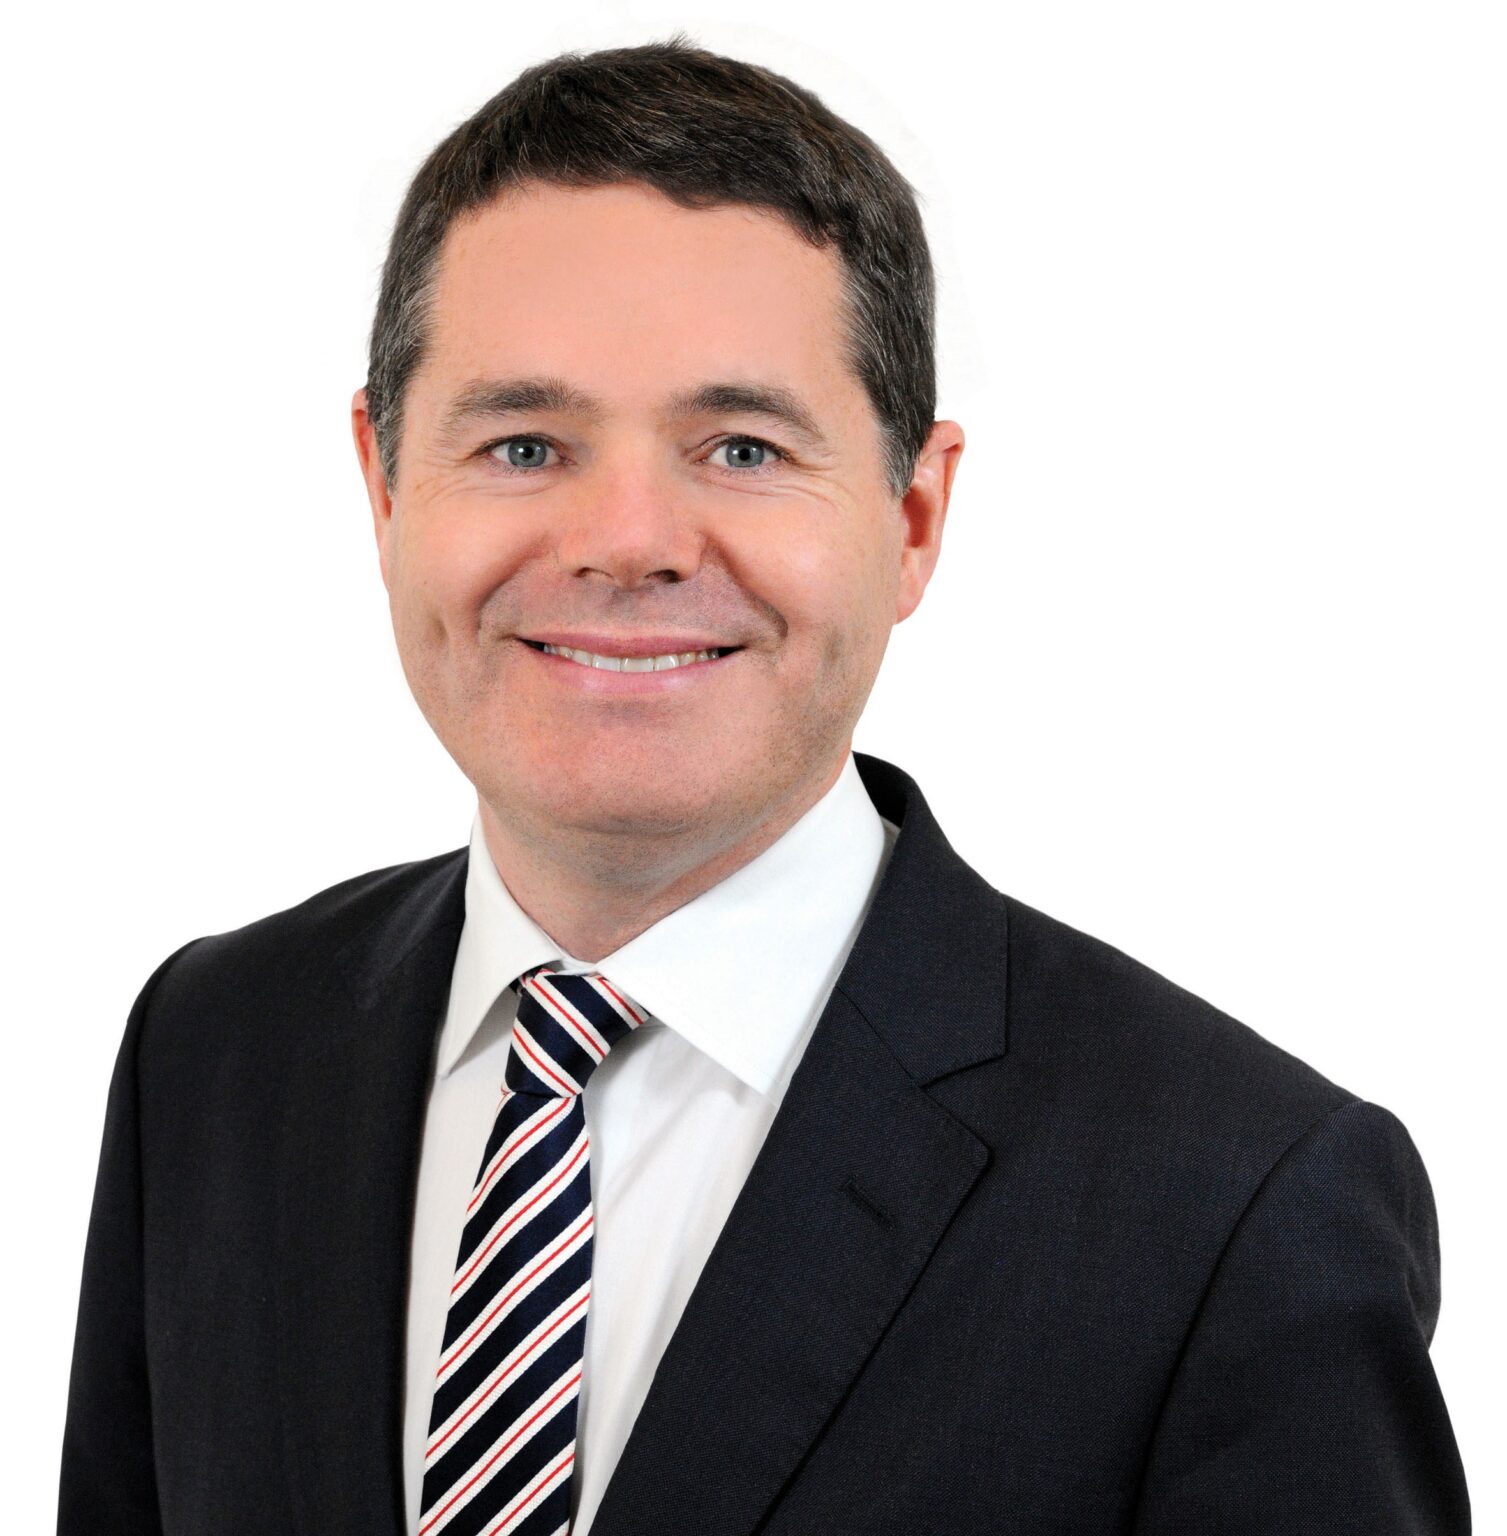 Minister Paschal Donohoe TD